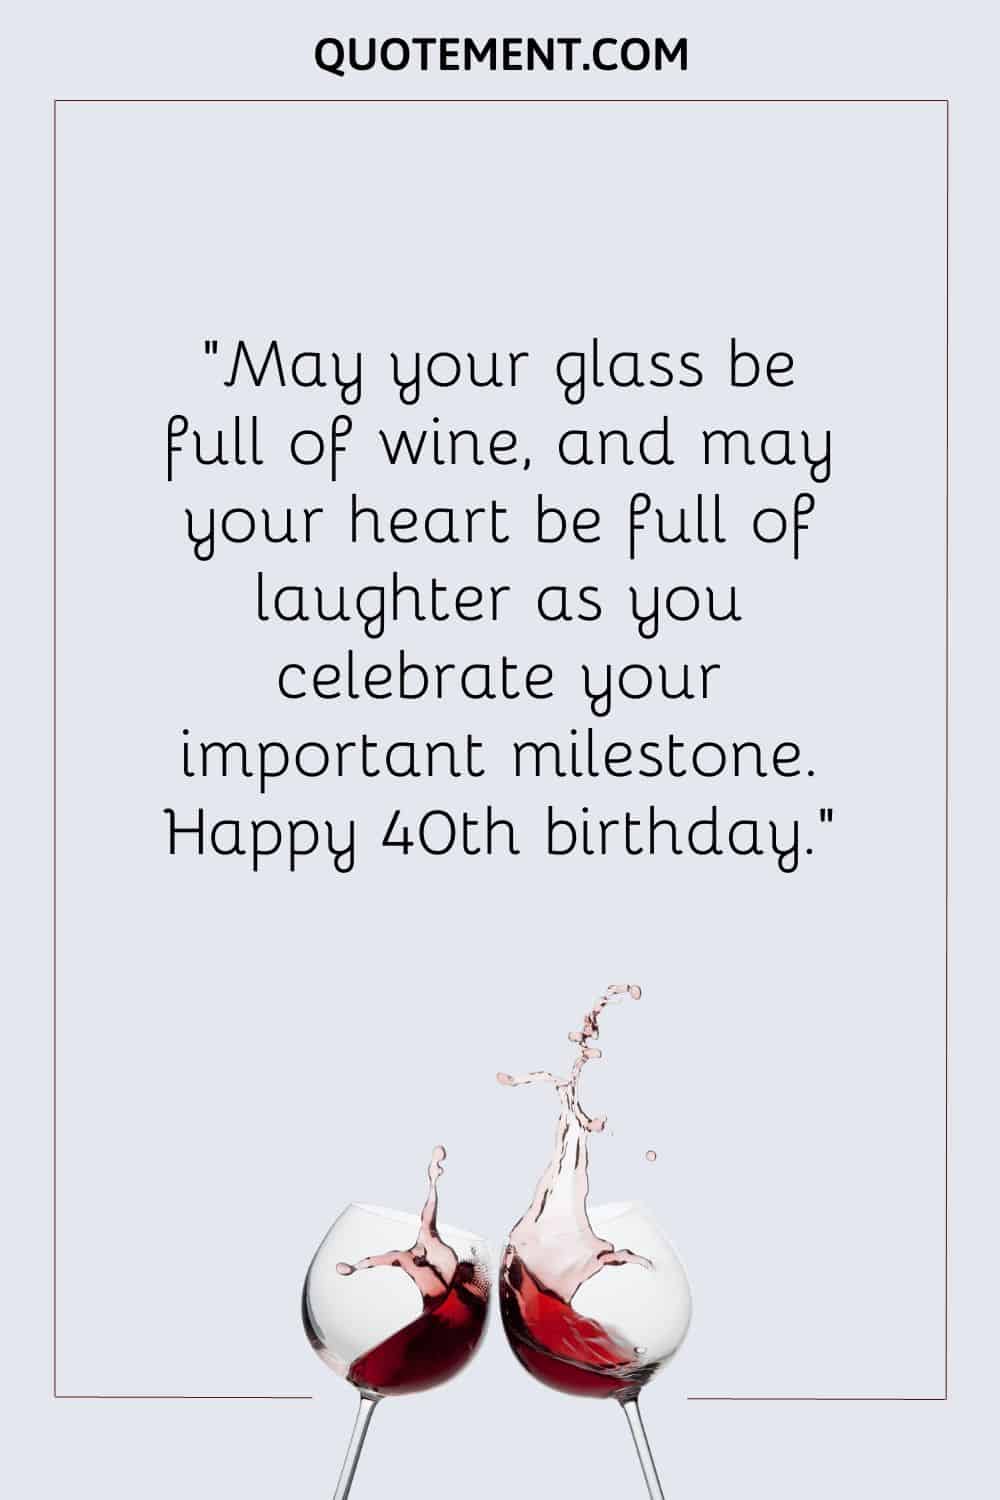 May your glass be full of wine, and may your heart be full of laughter as you celebrate your important milestone